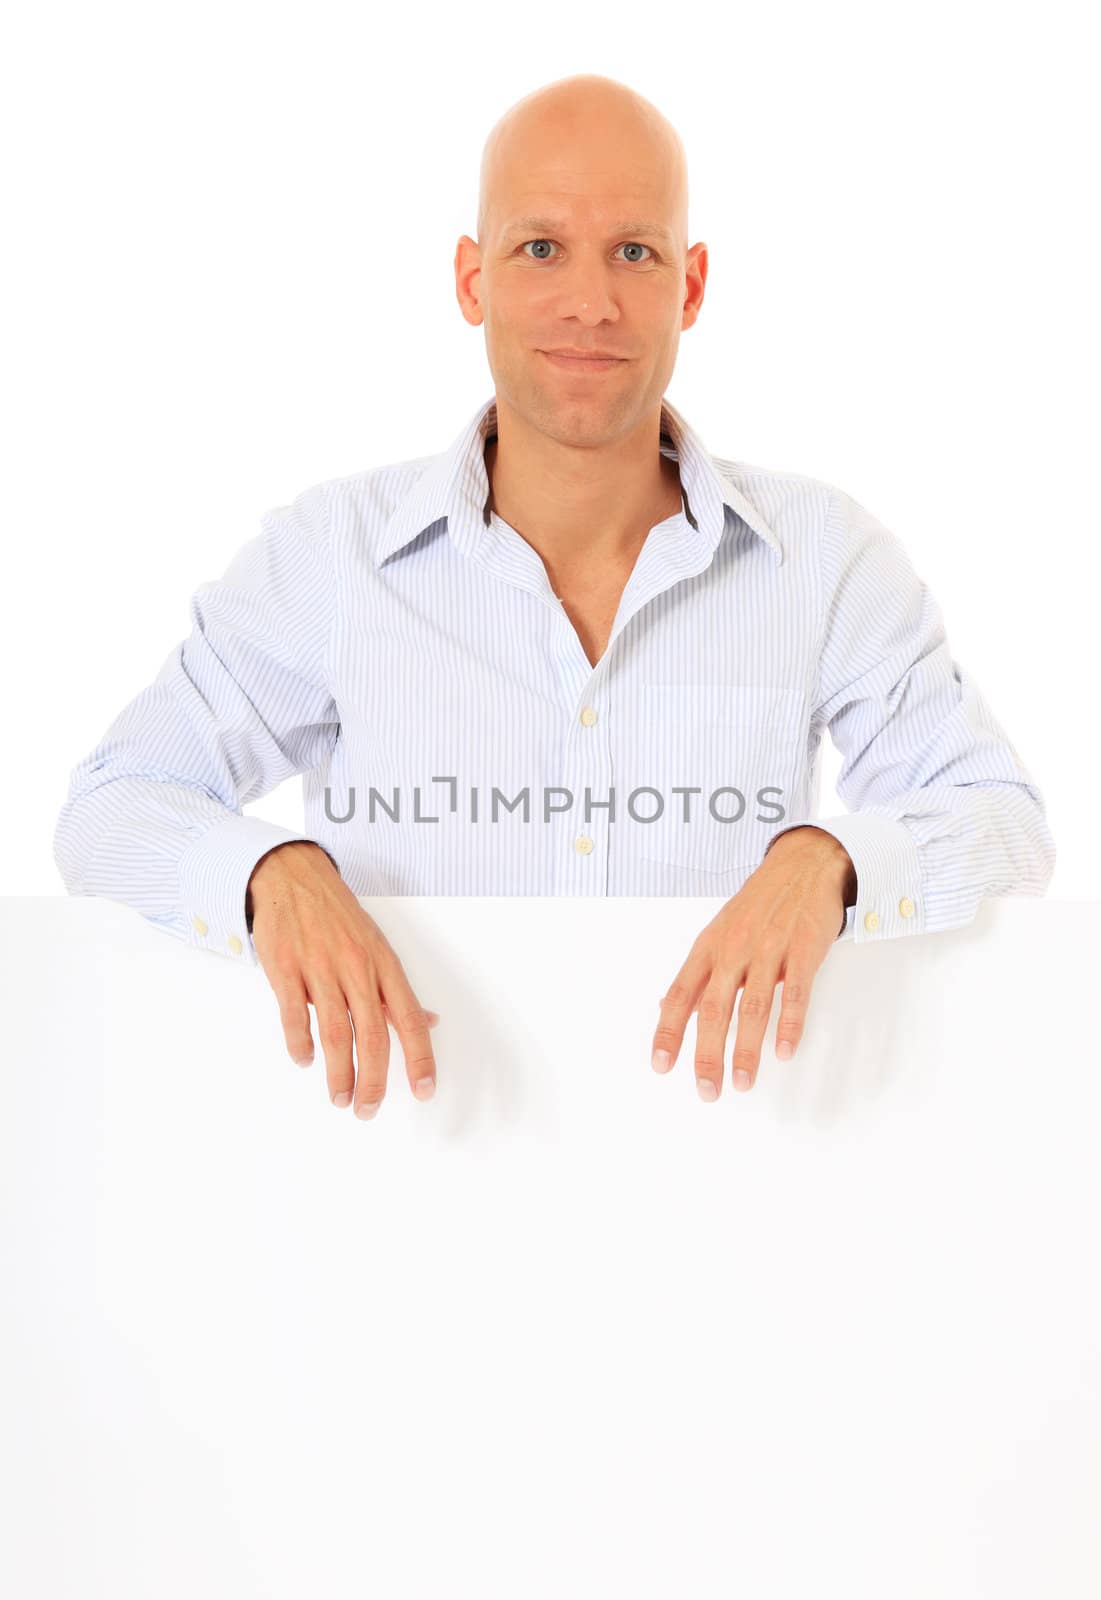 Attractive young man standing behind white wall. All on white background.